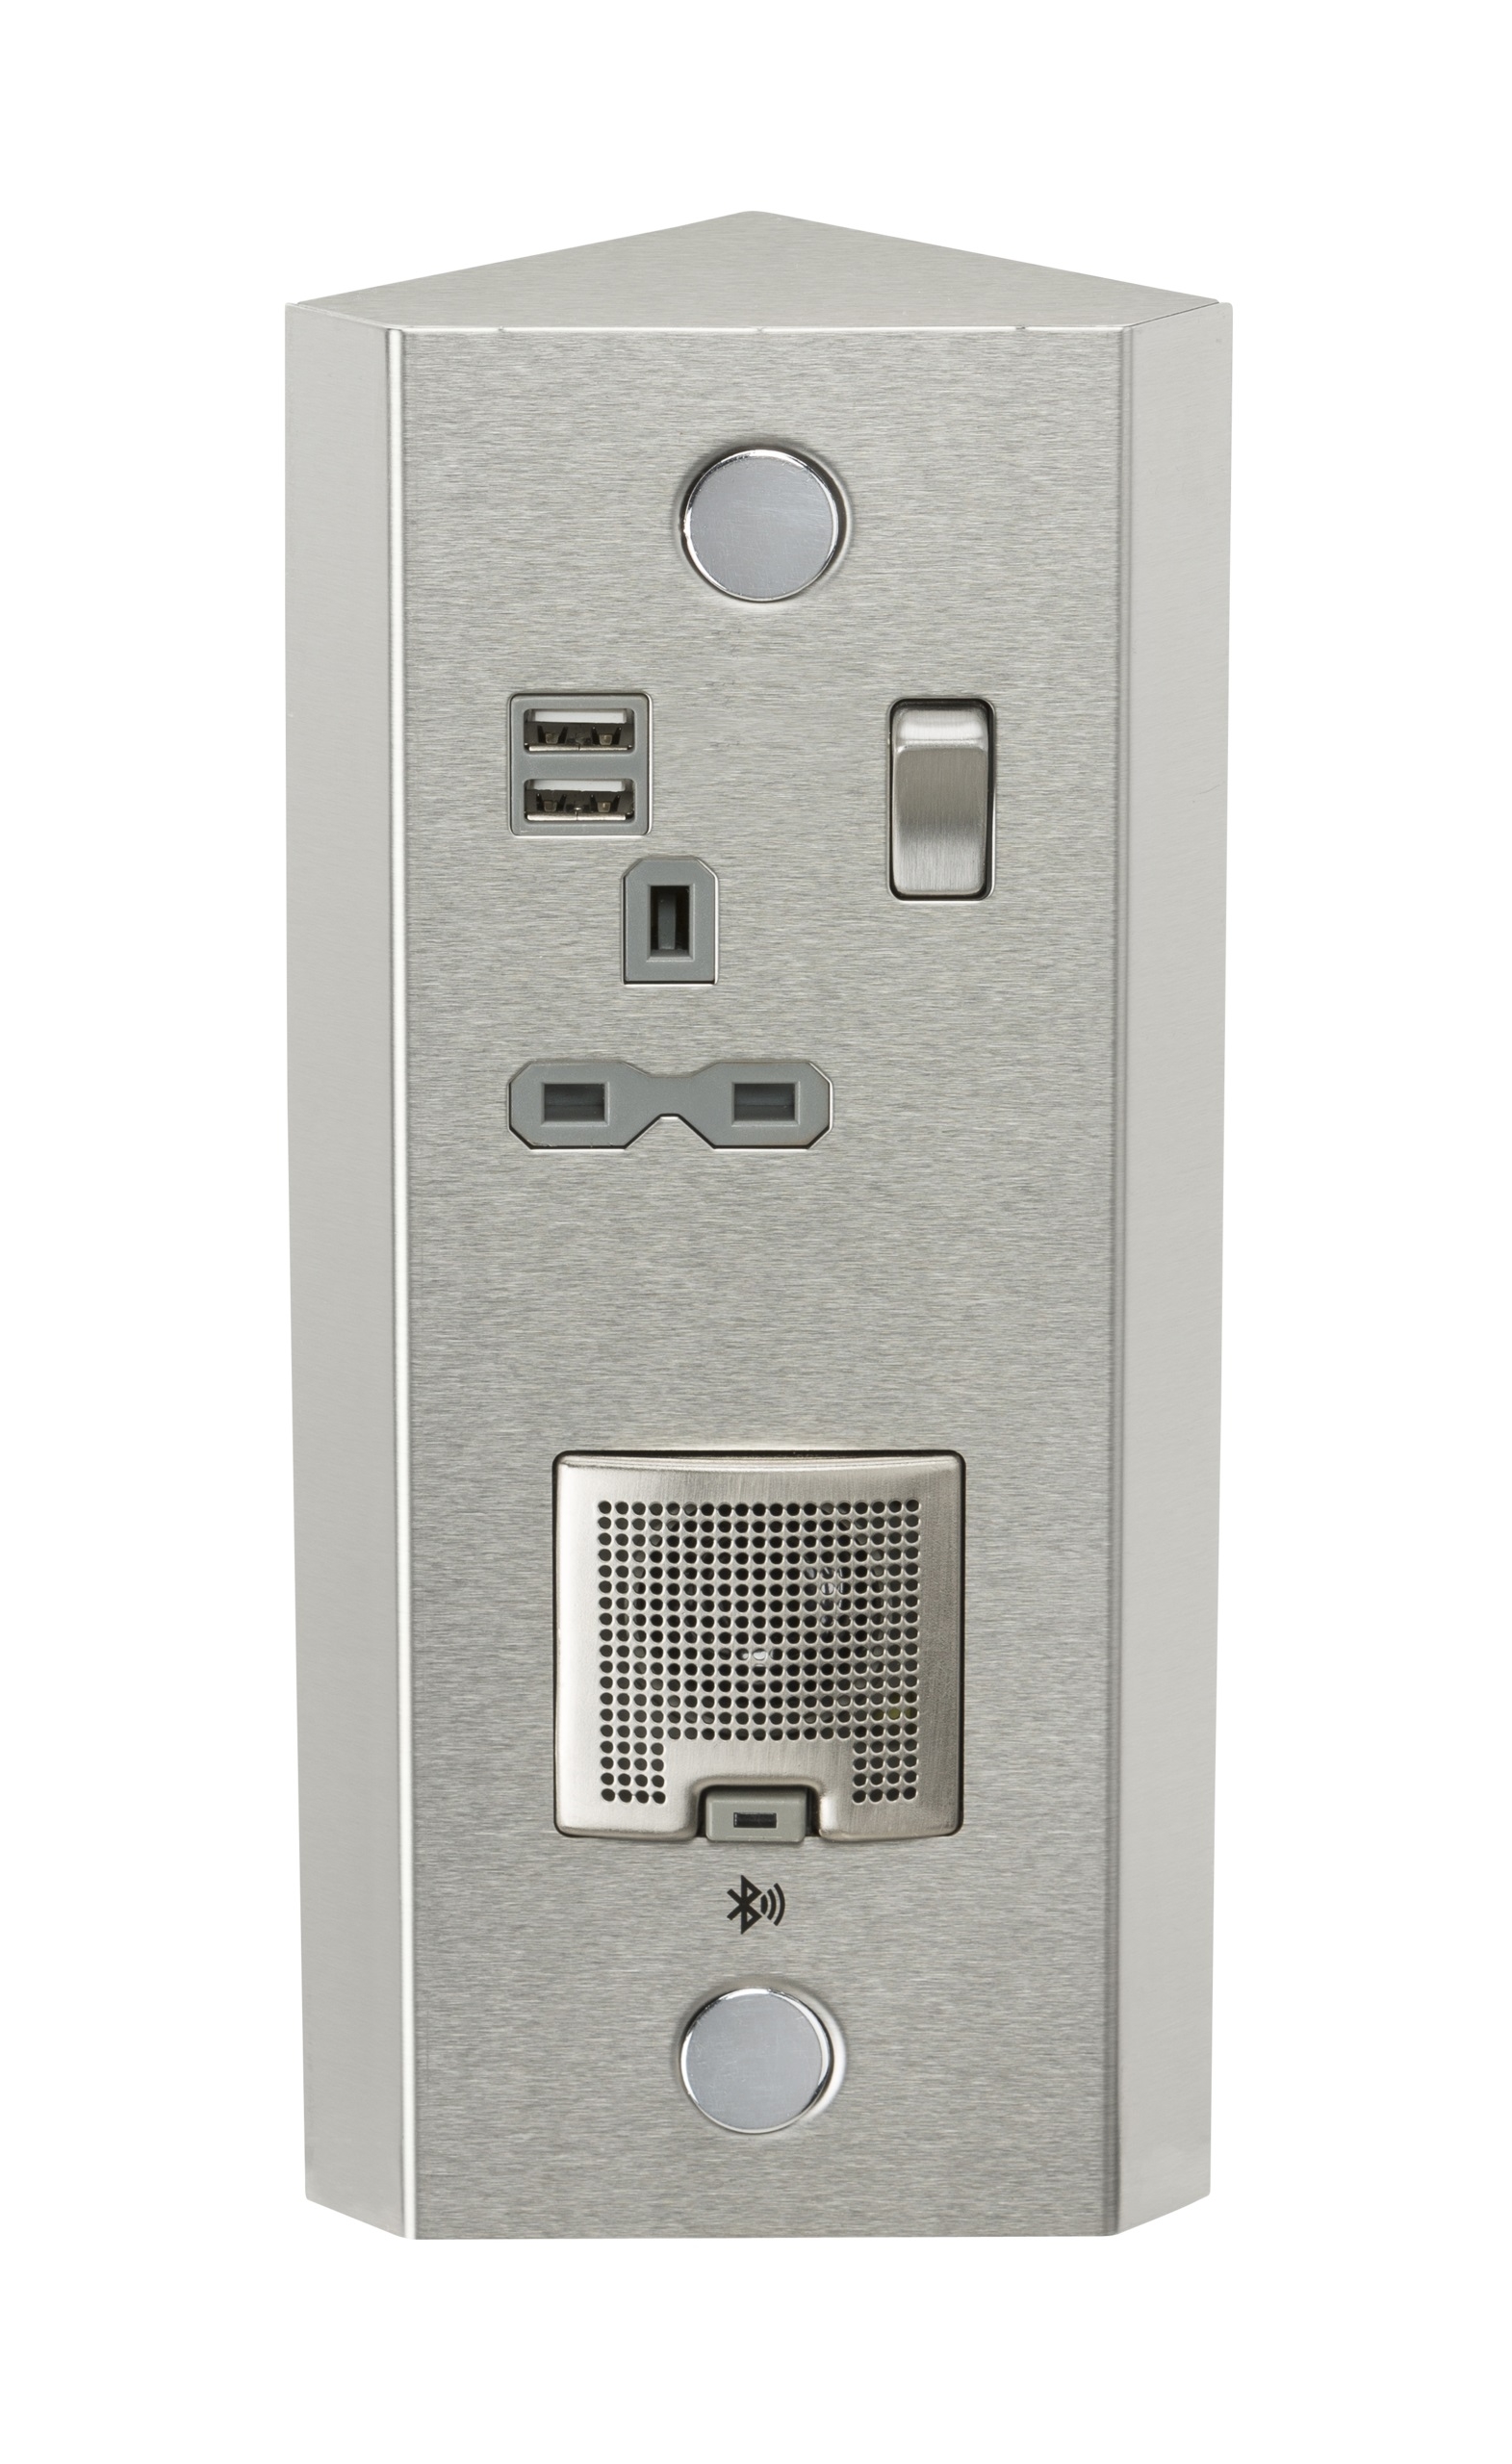 LINK2HOME - Indoor Remote Control Outlets with Countdown Timer and Random  Mode 3 power outlets + 1 remote